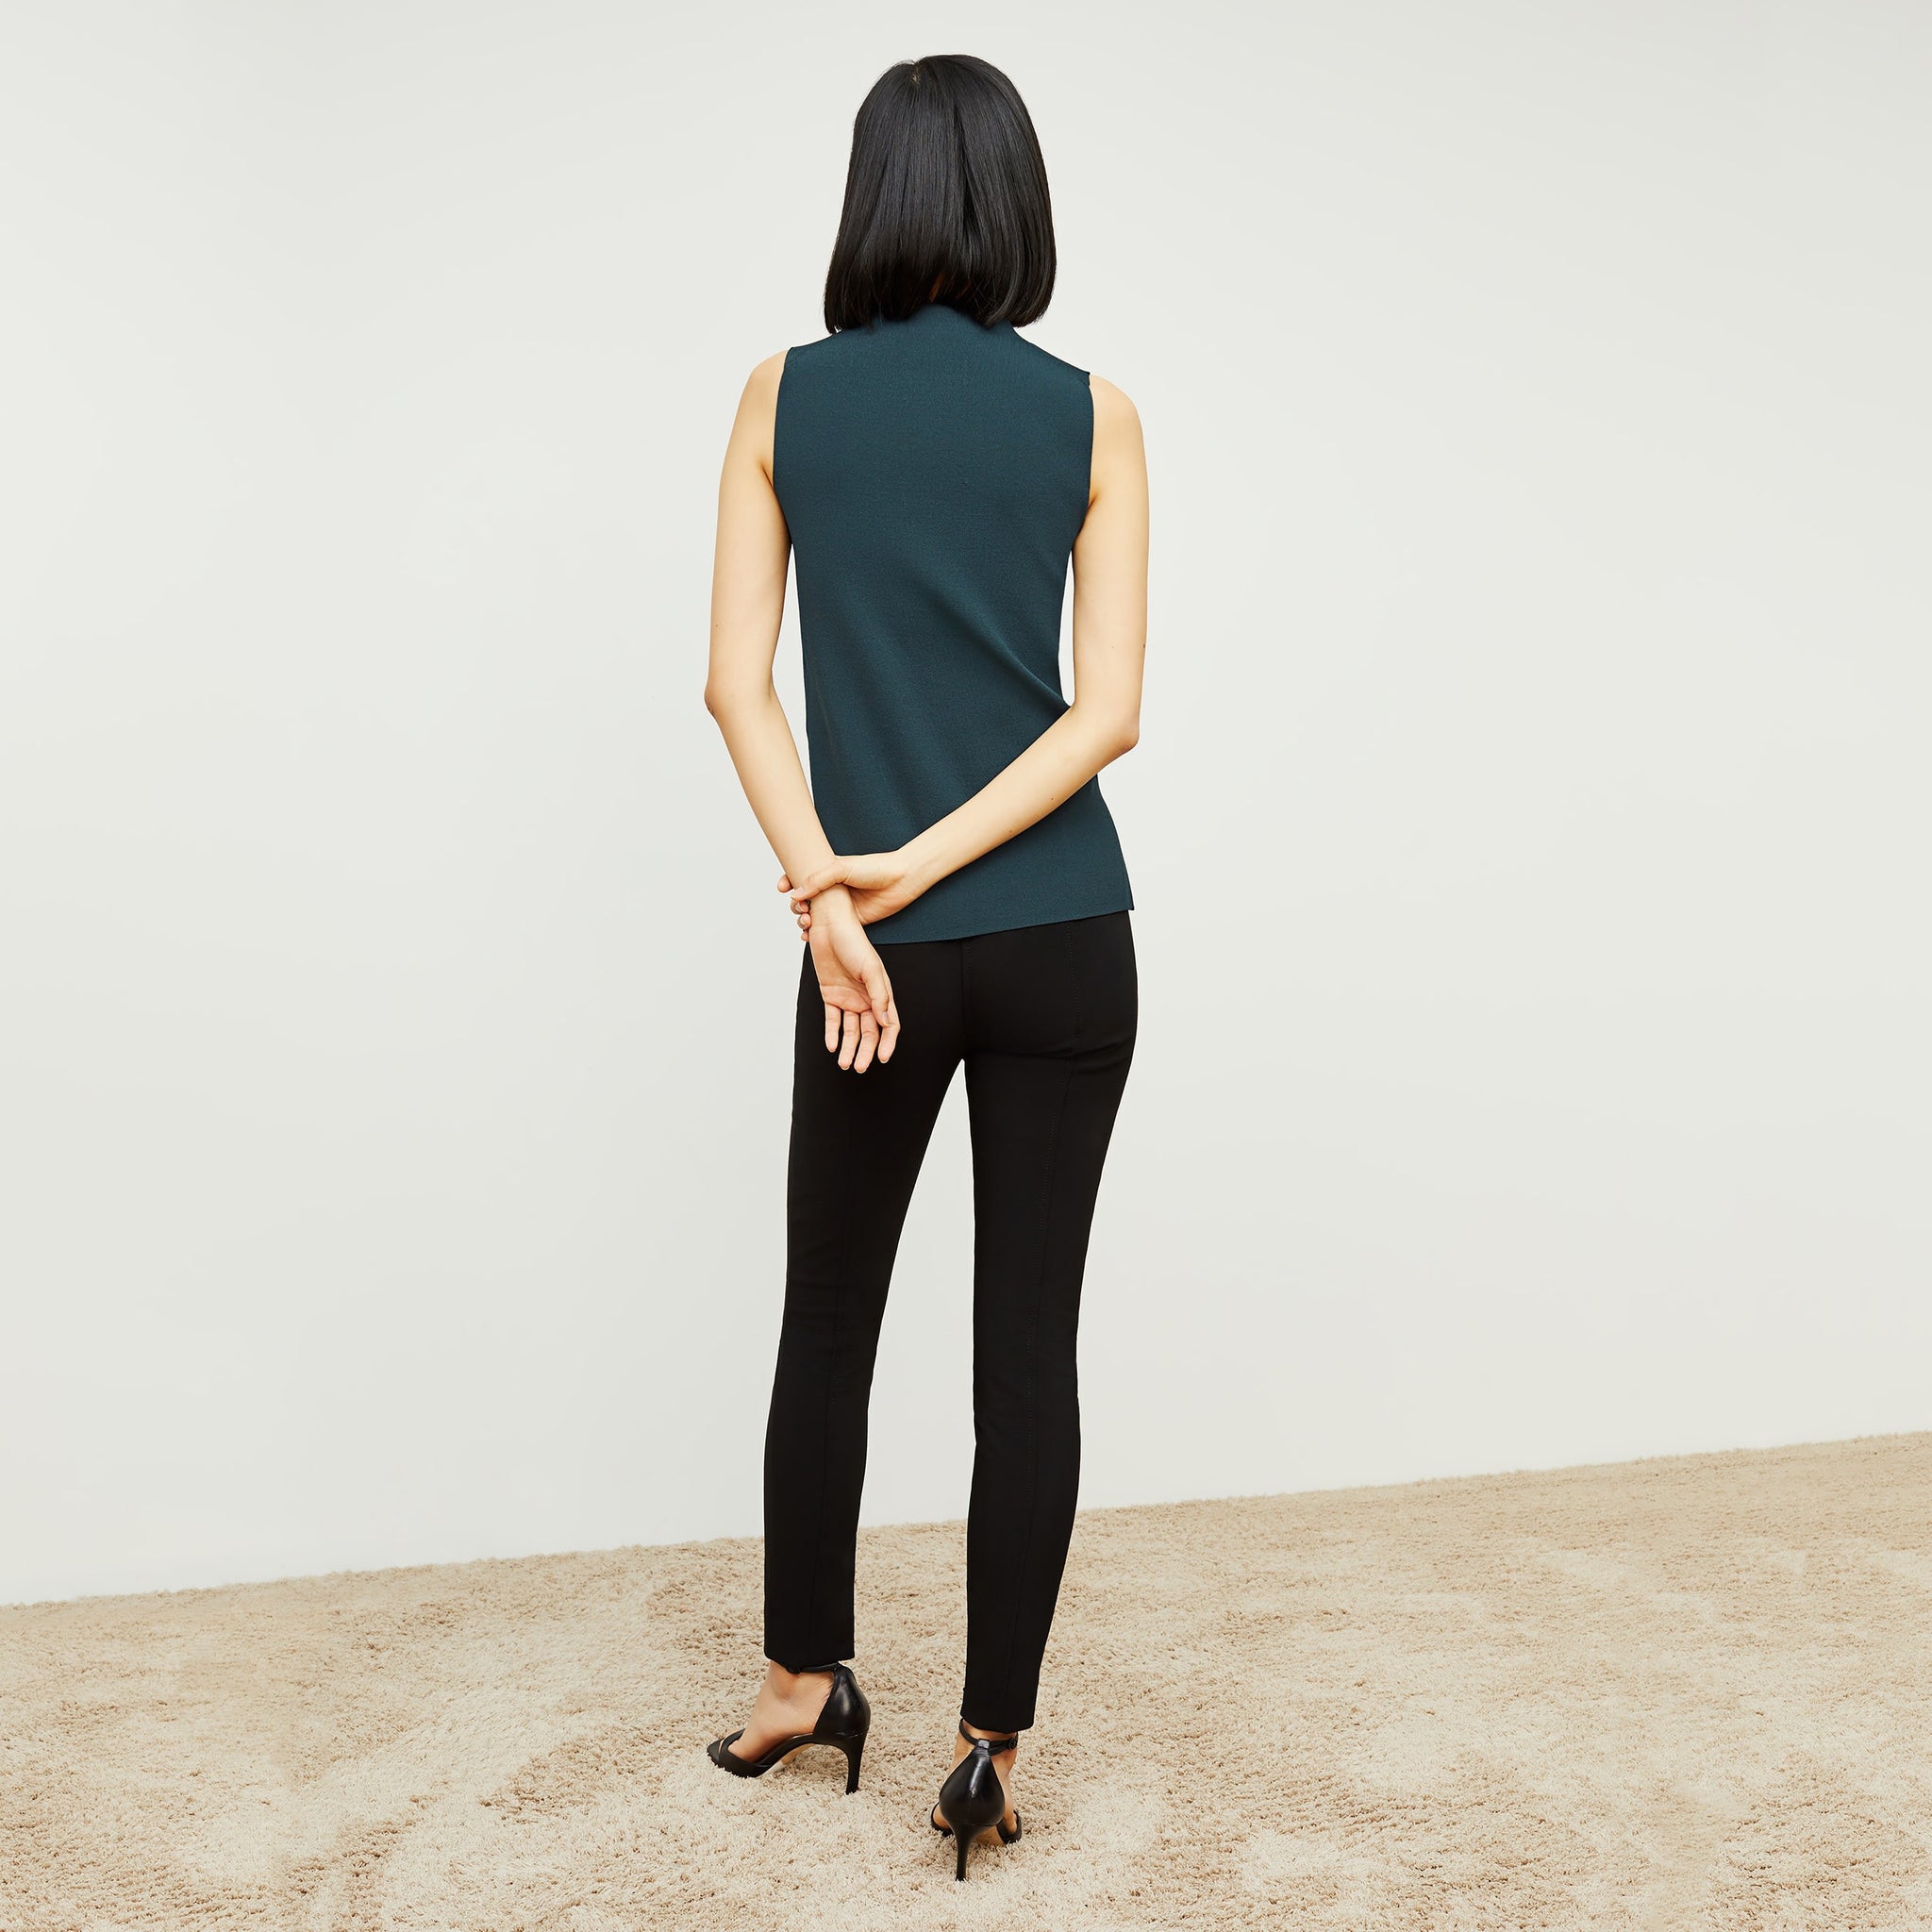 Back image of a woman standing wearing the curie pant in black